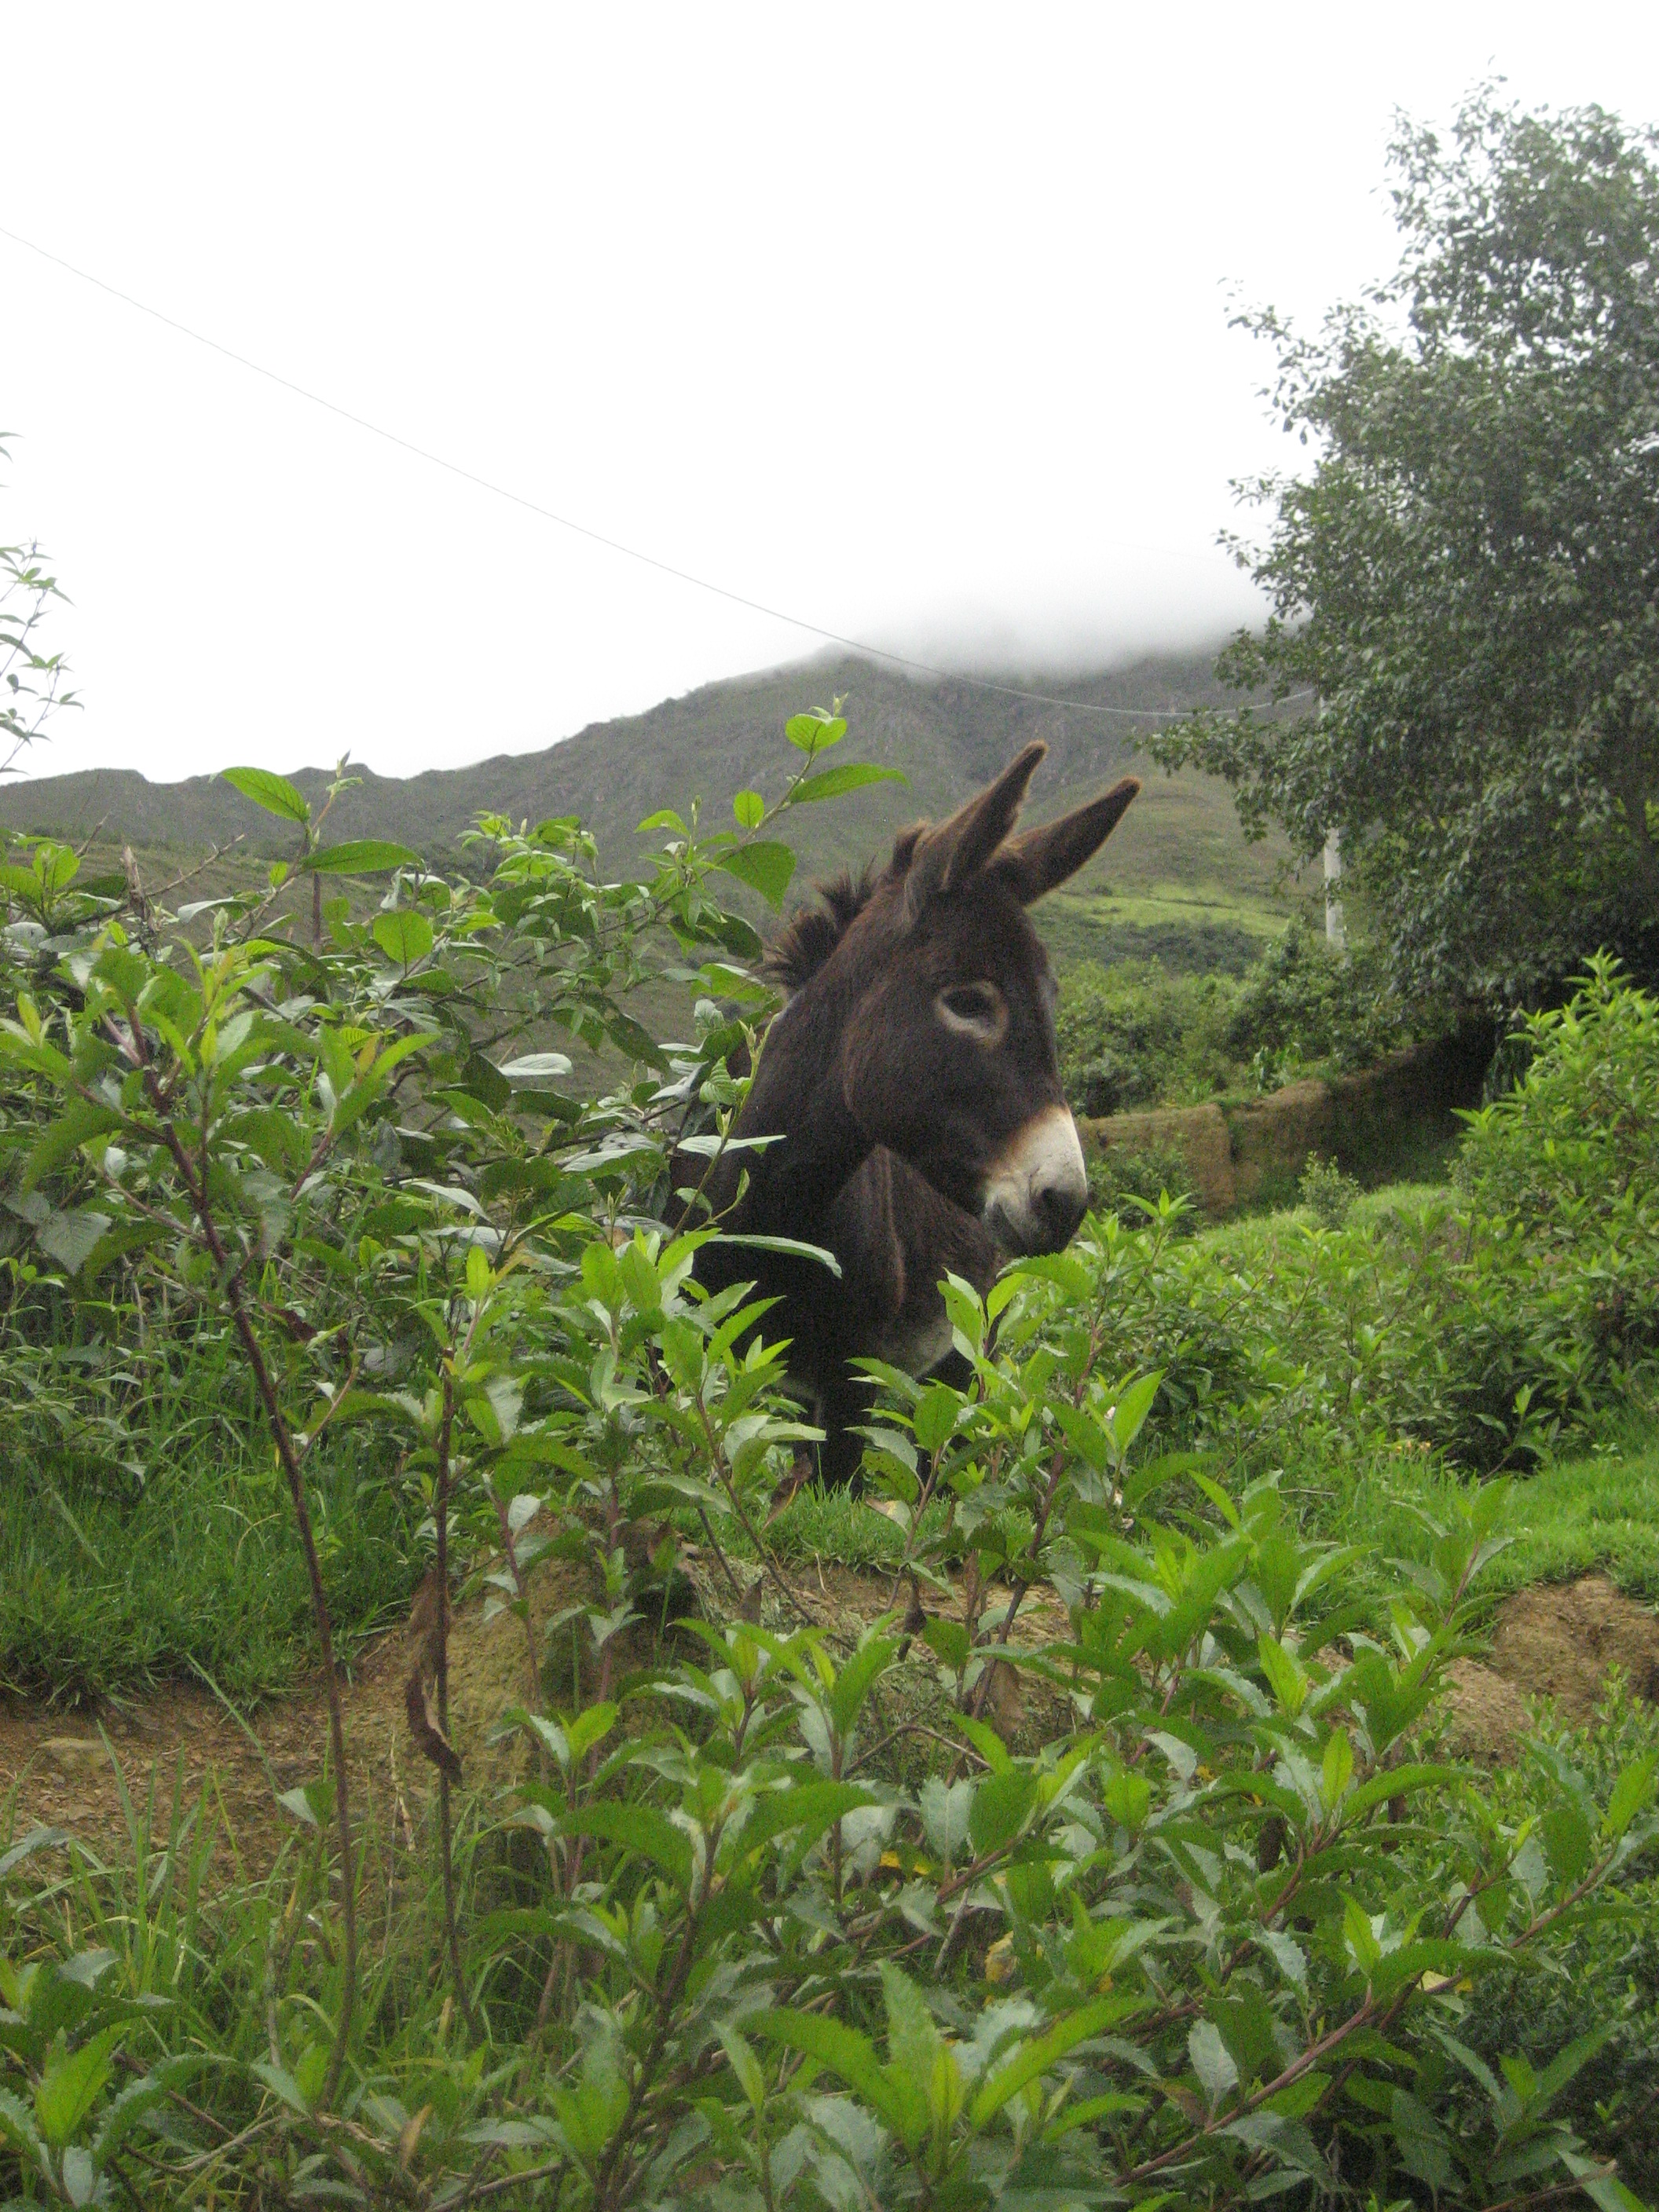 Donkey grazing in the filed